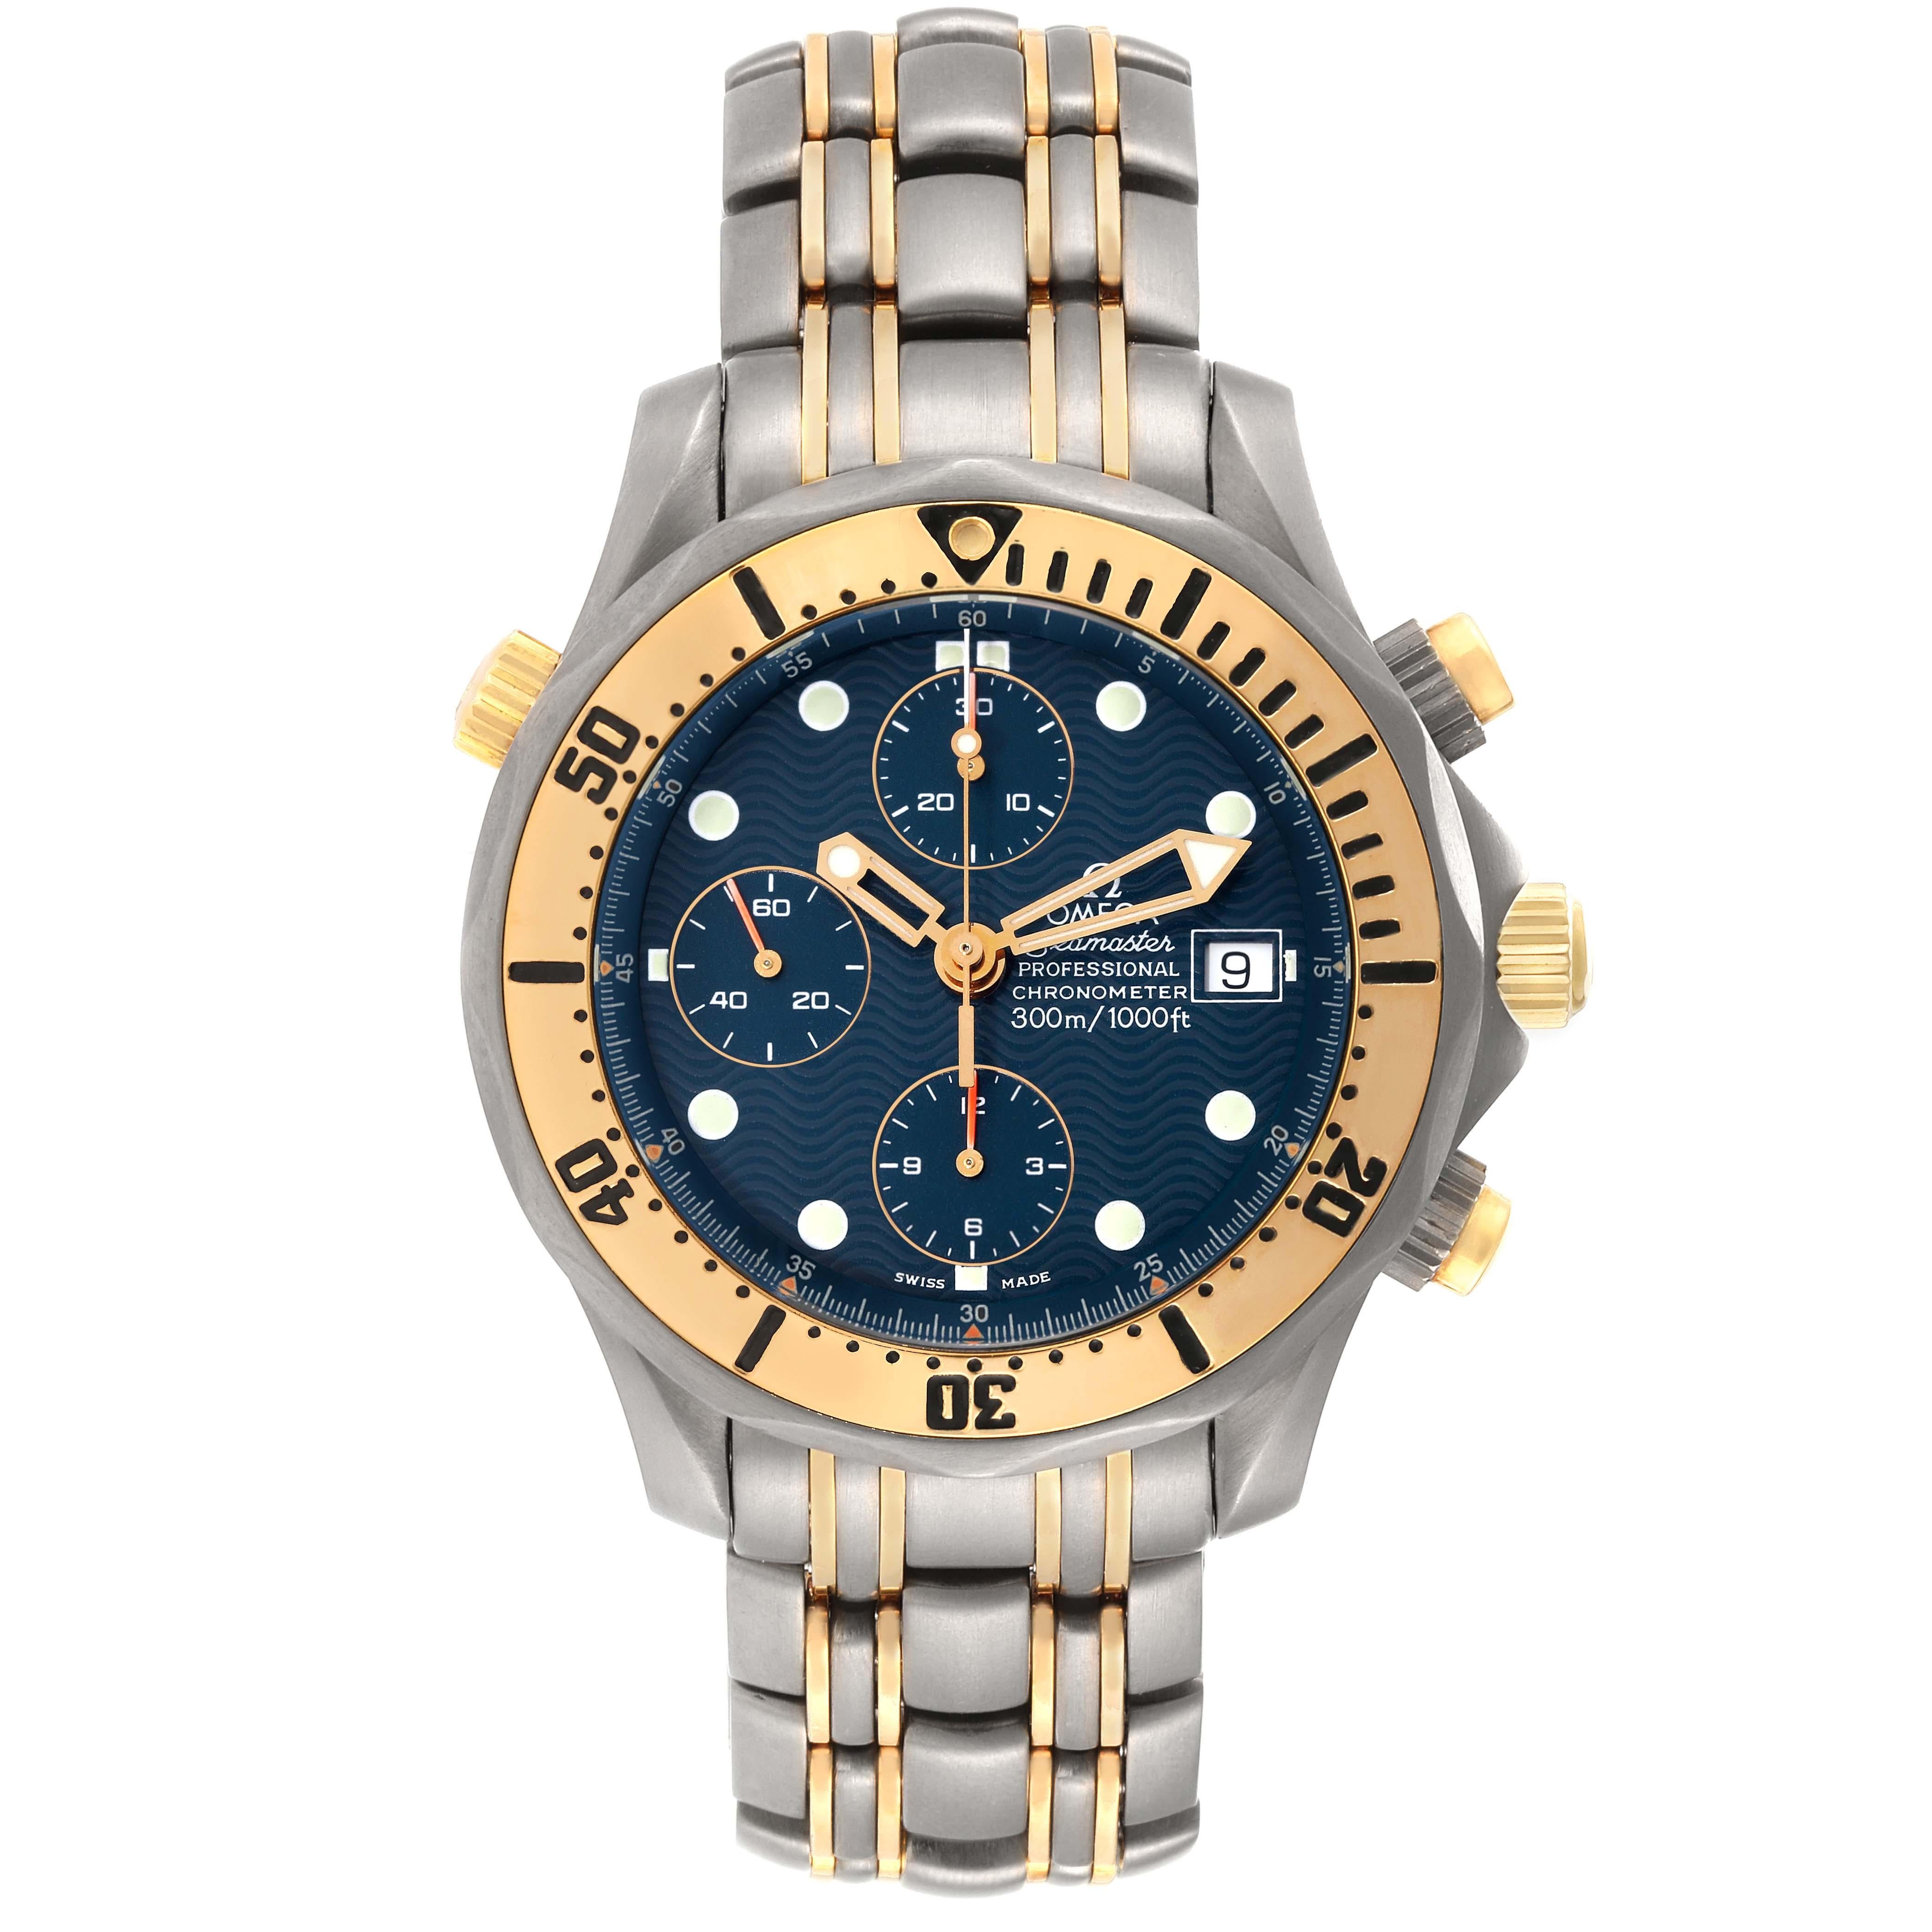 Omega Seamaster 41mm Titanium Yellow Gold Mens Watch 2297.80.00. Officially certified chronometer automatic self-winding movement. Titanium and 18K yellow gold case 41.5 mm in diameter. Omega logo on a crown. Unidirectional rotating titanium and 18K